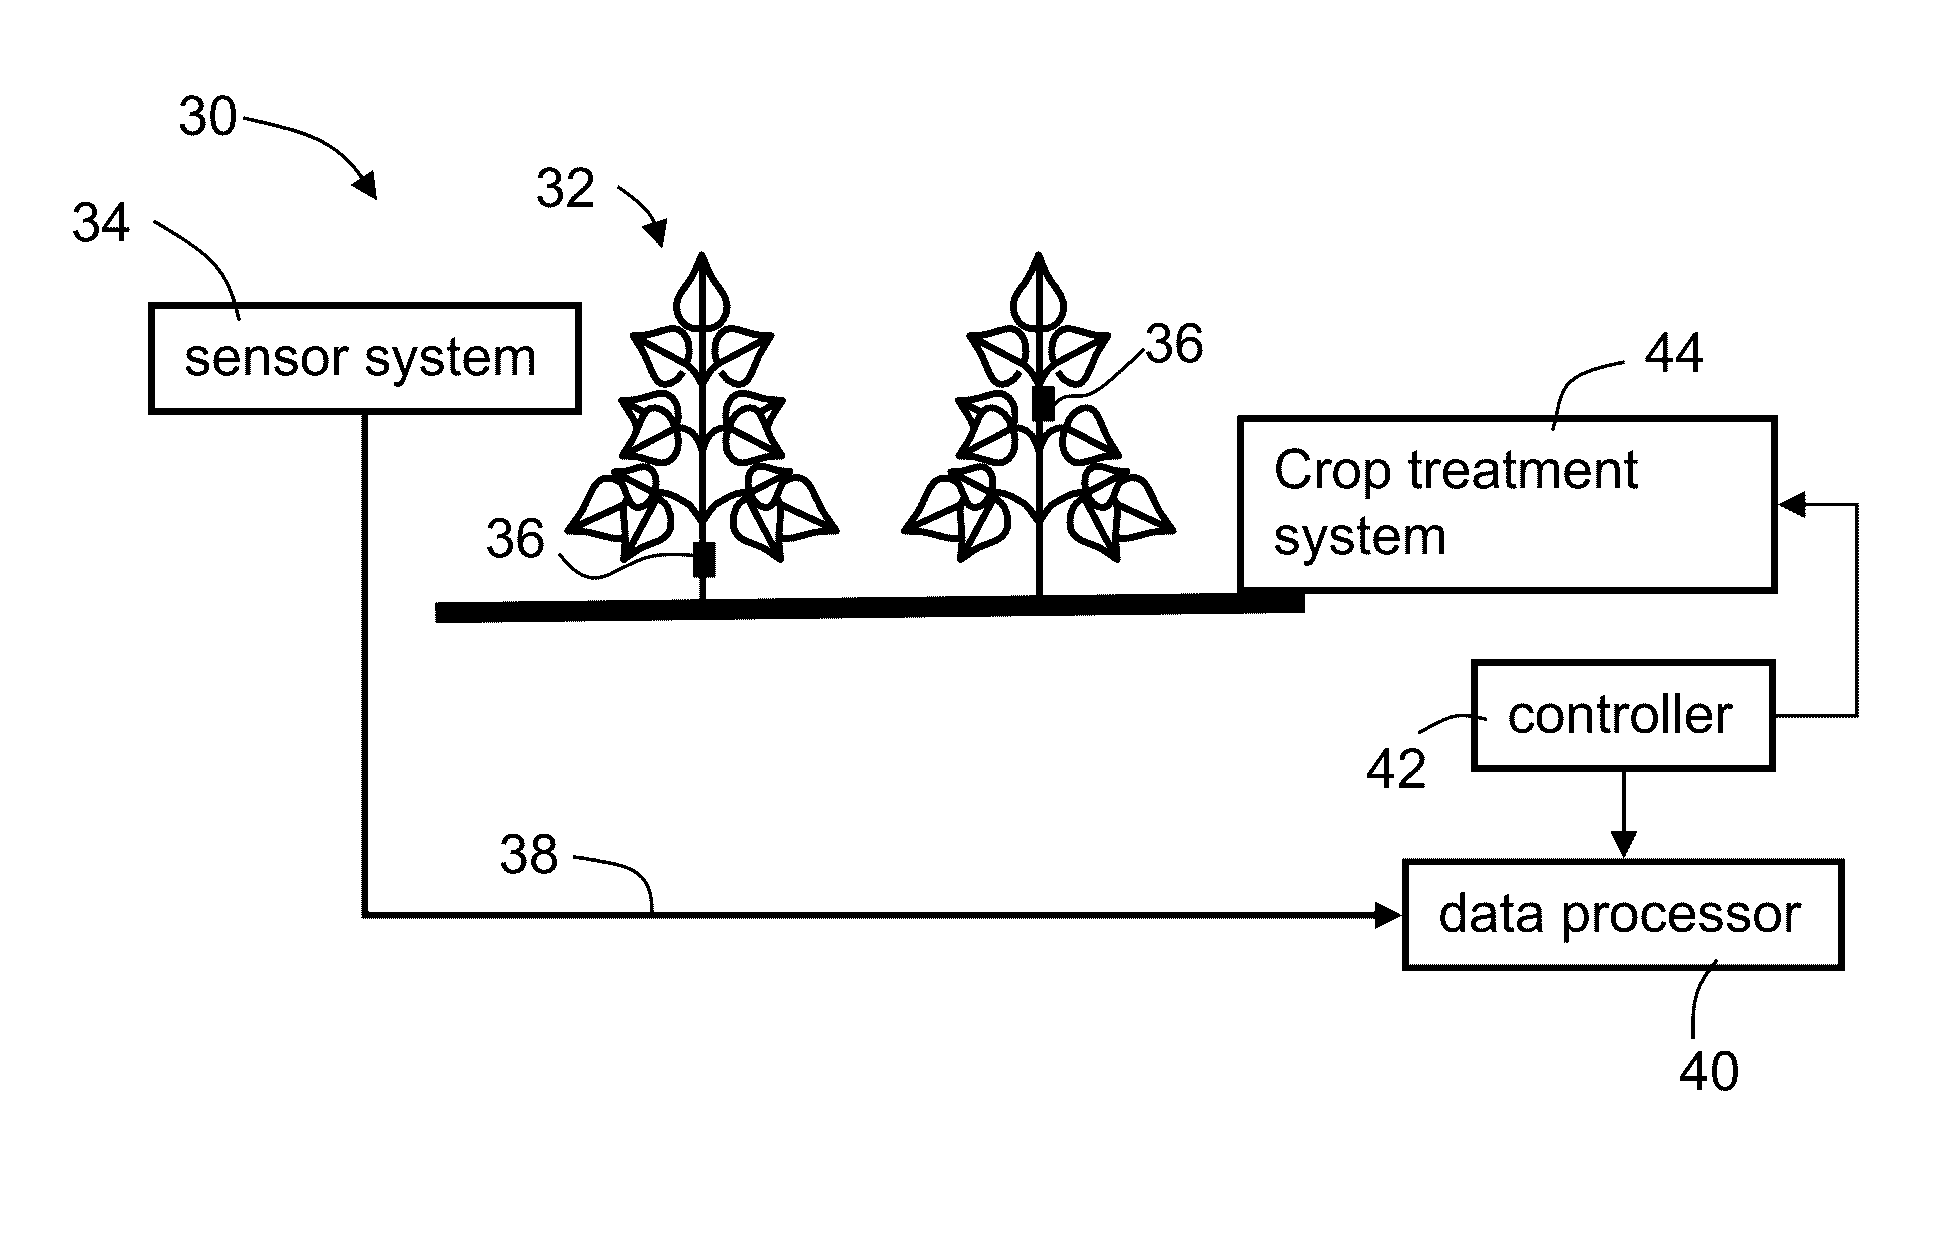 Method and system for treating crop according to predicted yield